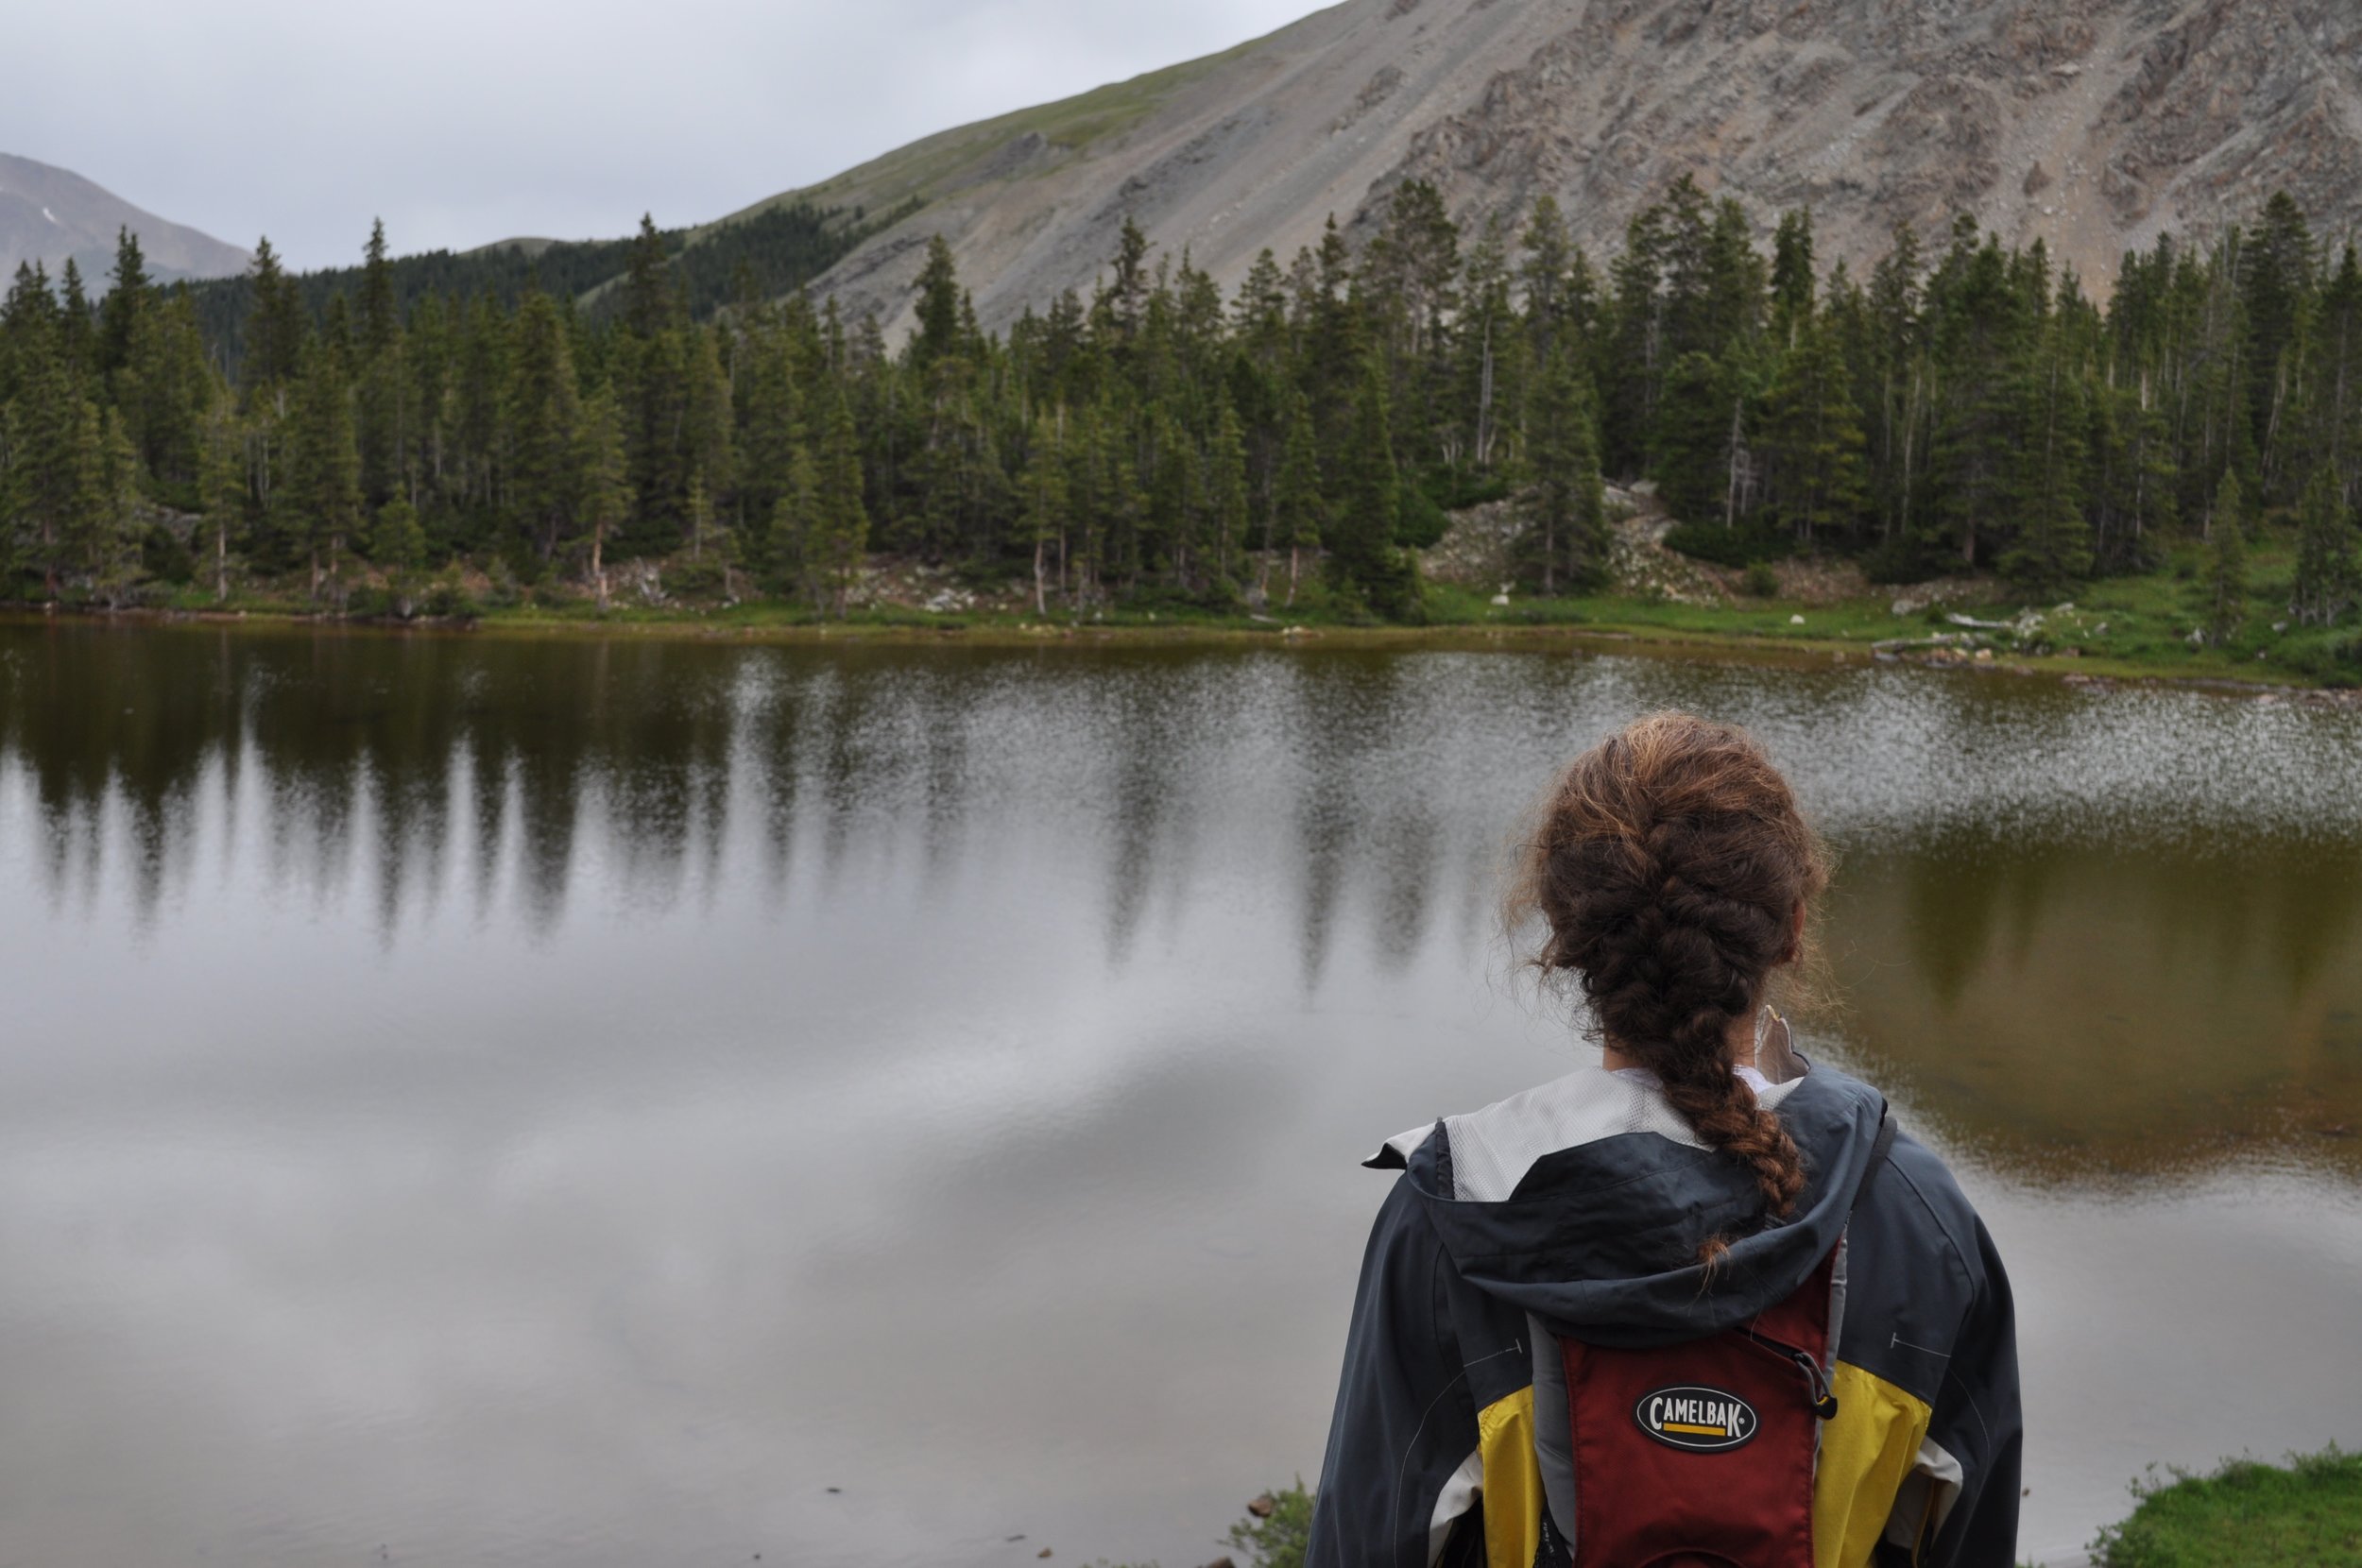  My friend Avery overlooks Ptarmigan Lake and takes in nature.&nbsp; 